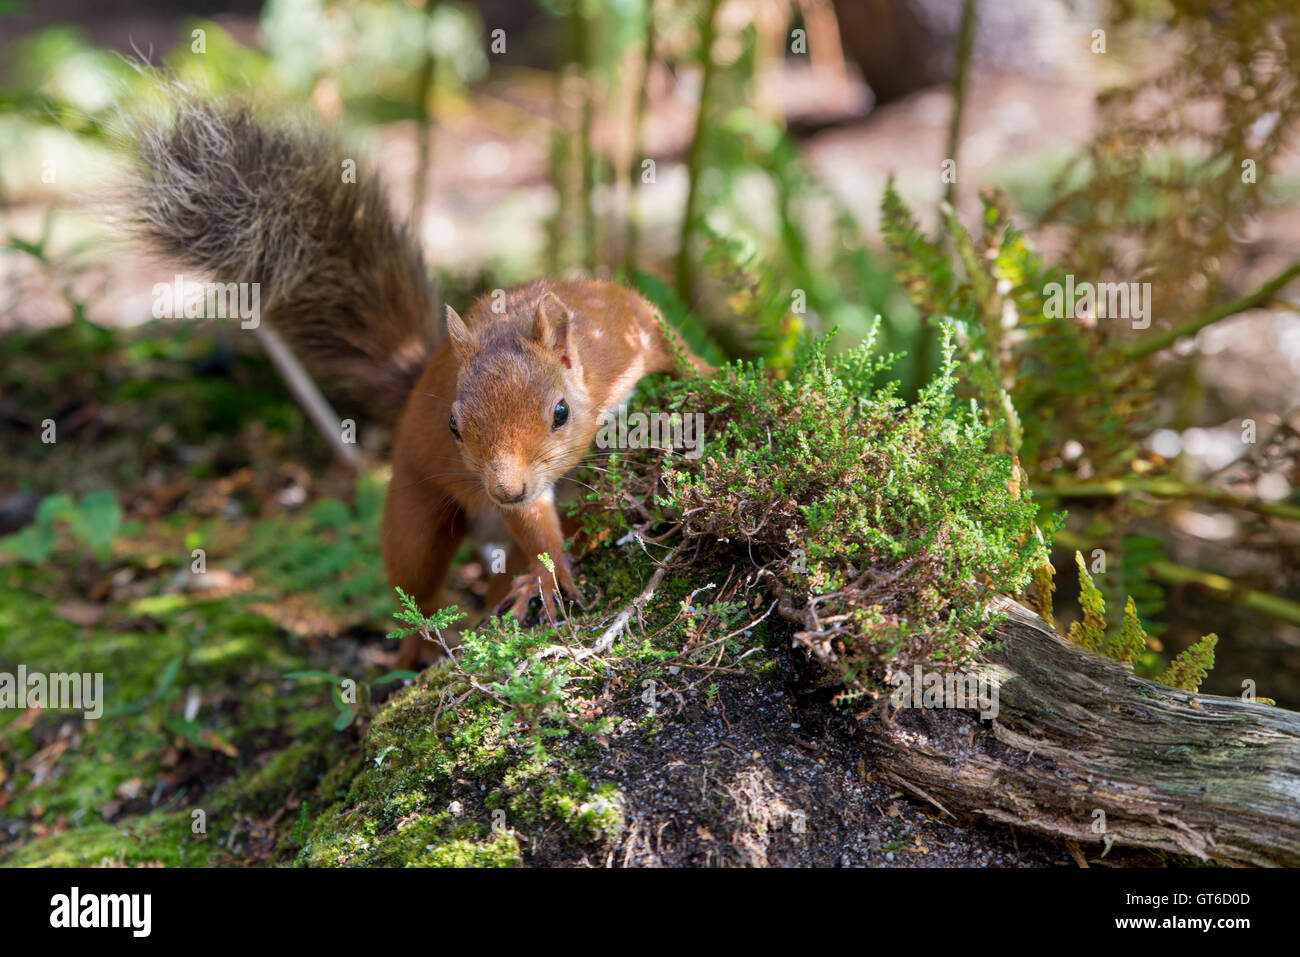 red squirrel, tuft, wild, animal, forest, nature, tree, creature, fluffy, eurasian, furry, nut, beauty, outdoor, funny, wood, ea Stock Photo